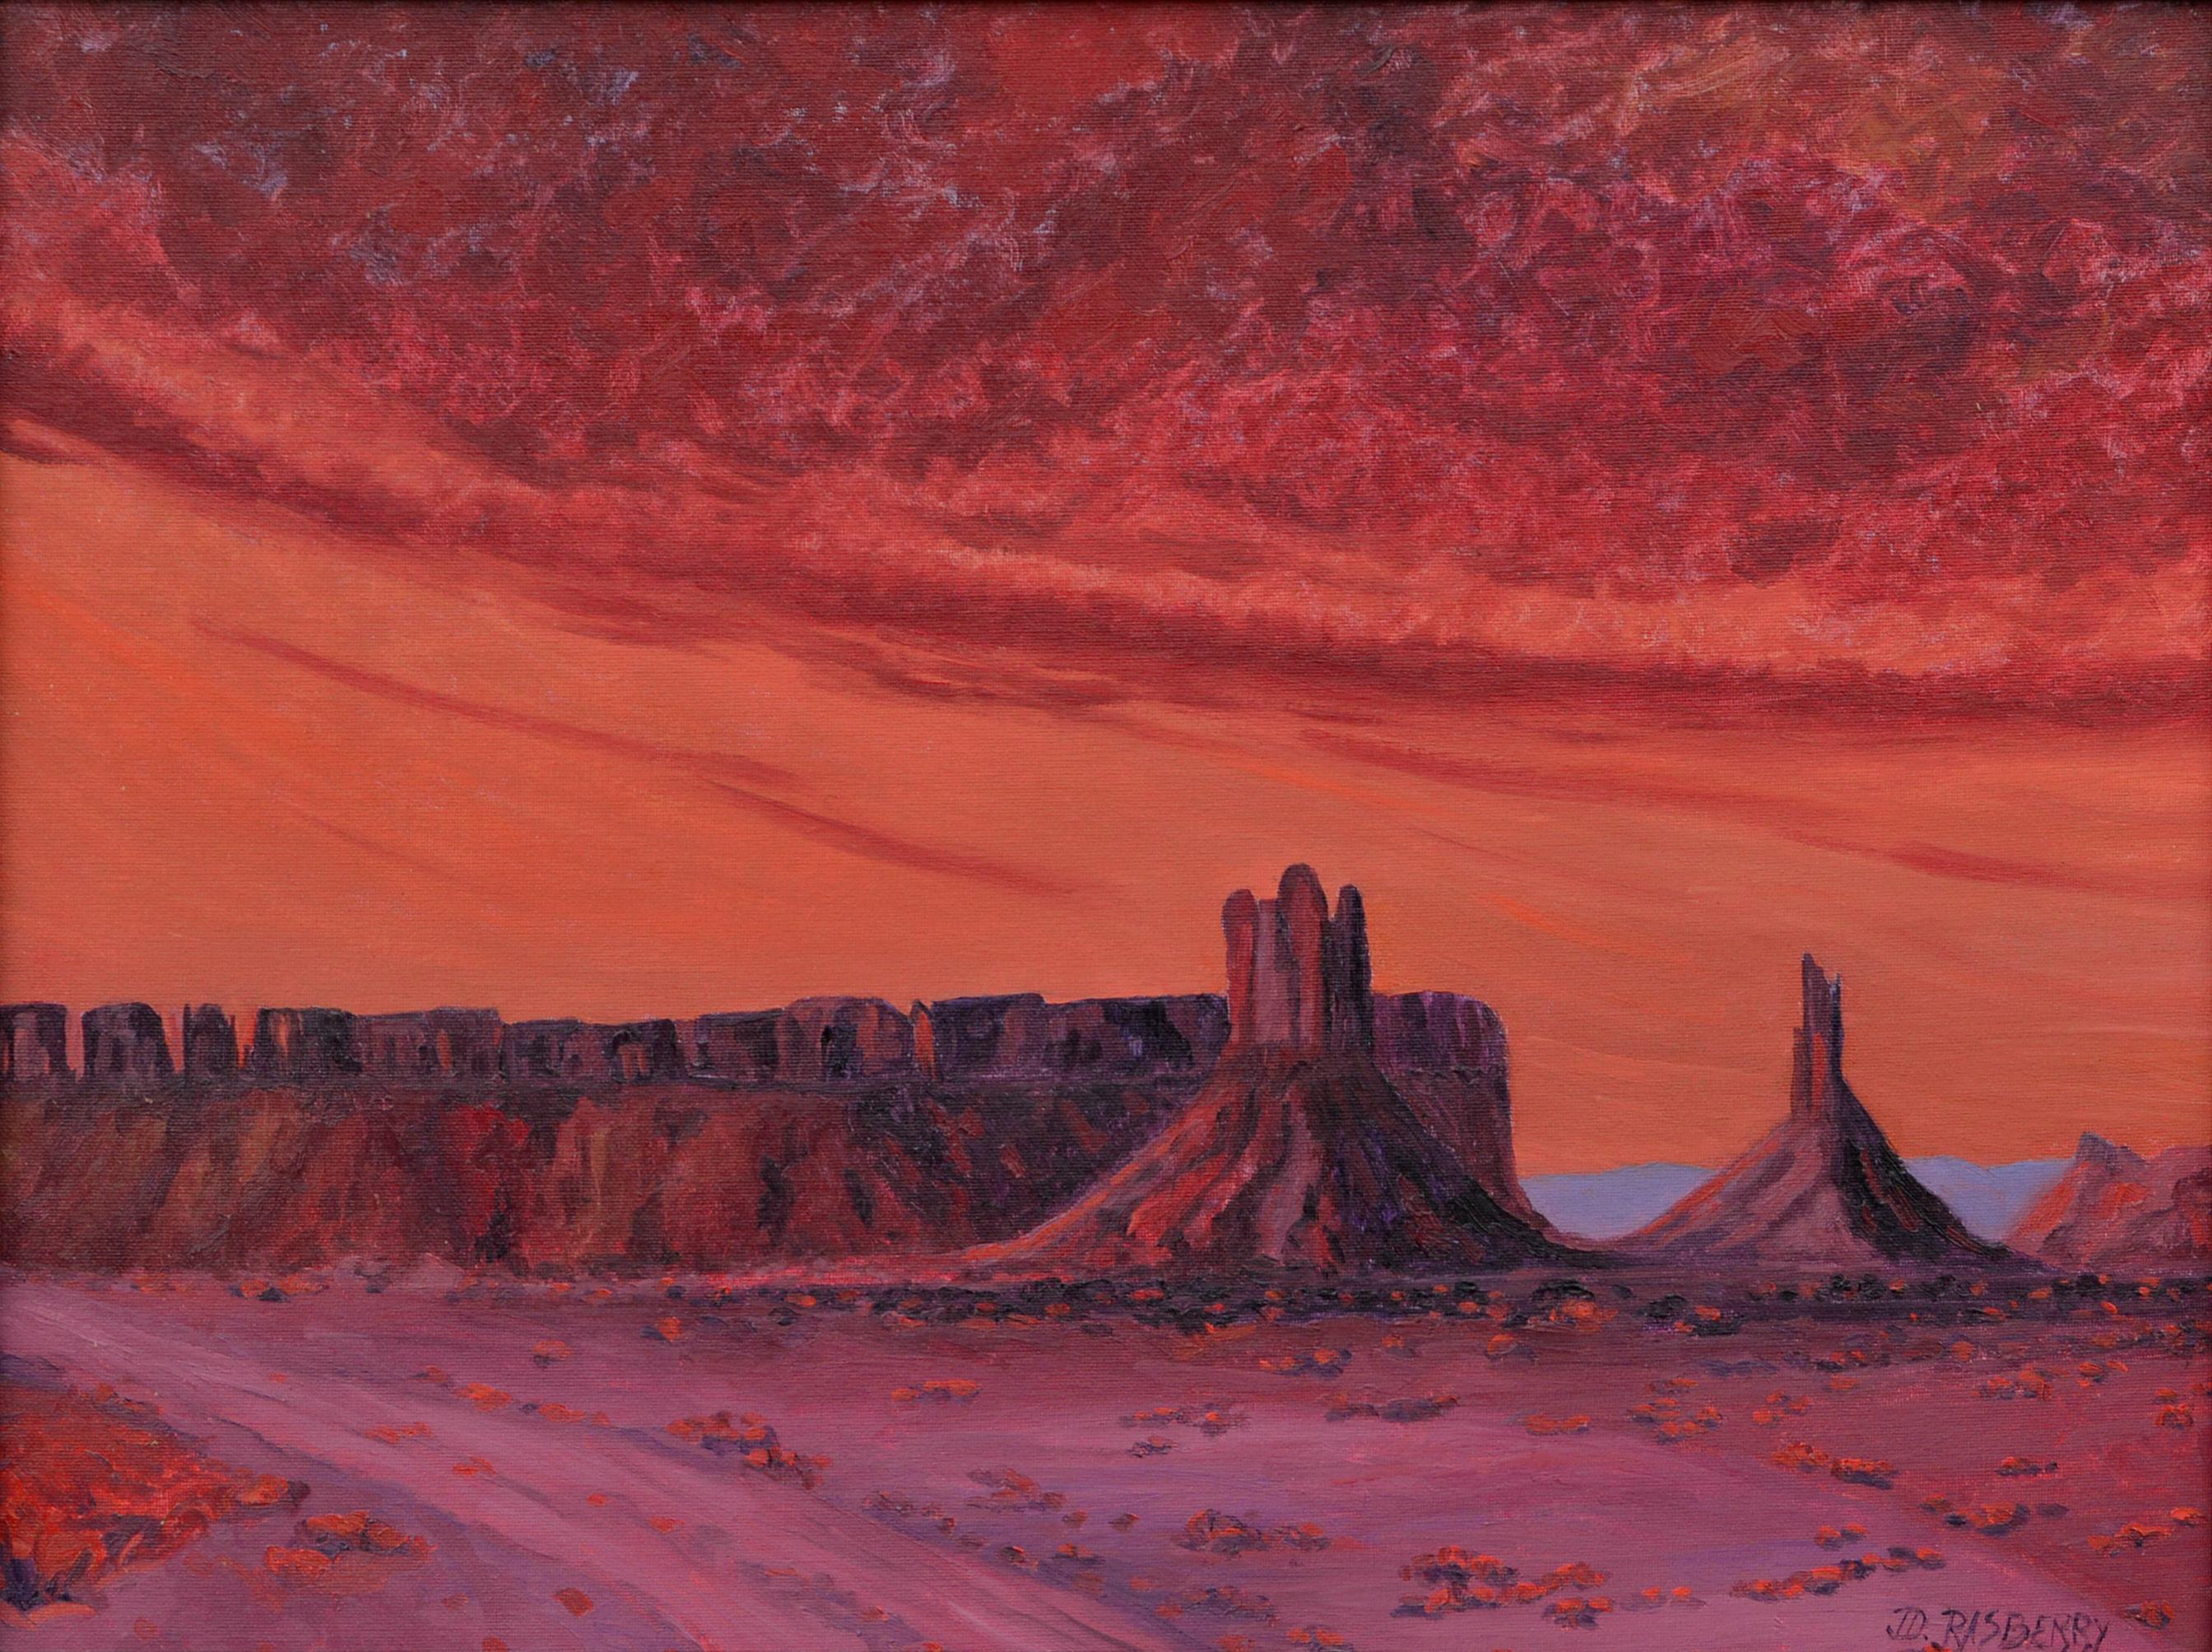 Purple and Red Mesa Landscape - Painting by Jesse Don Rasberry 